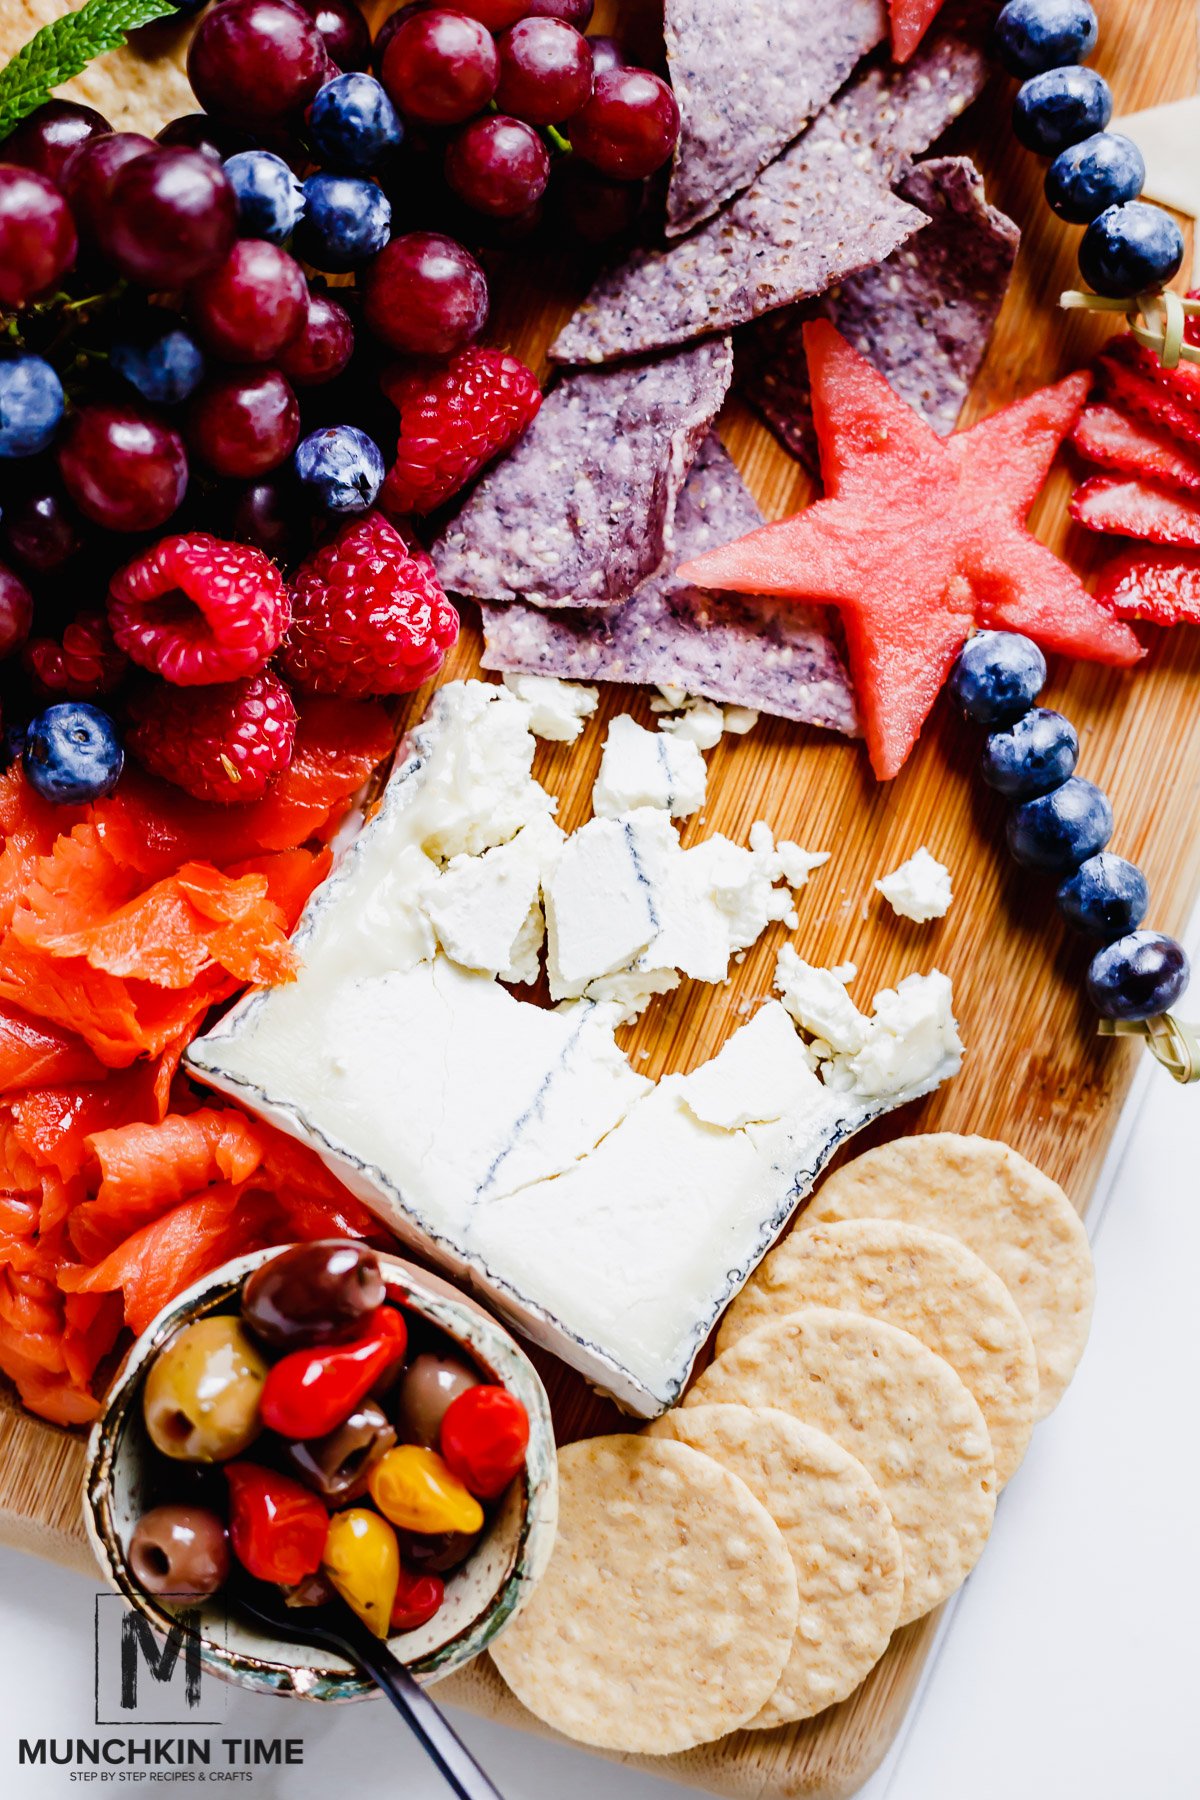 How to Make a Cheese Board - Memorial Day Recipe